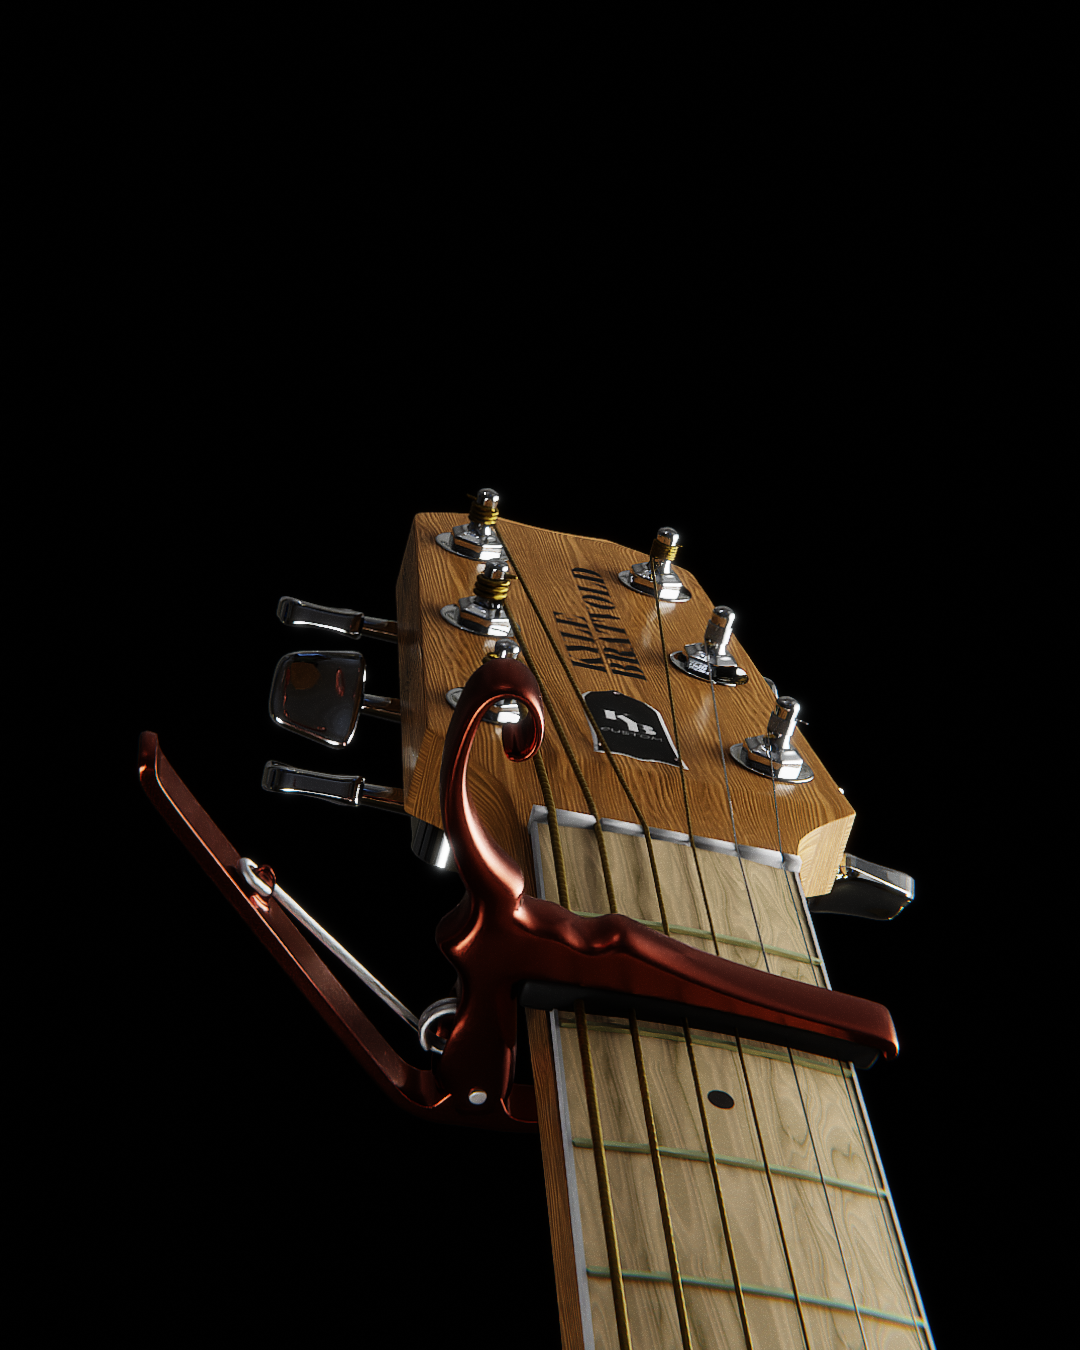 This is an example of a guitar related product image to show how realistic cgi product photography can appear.